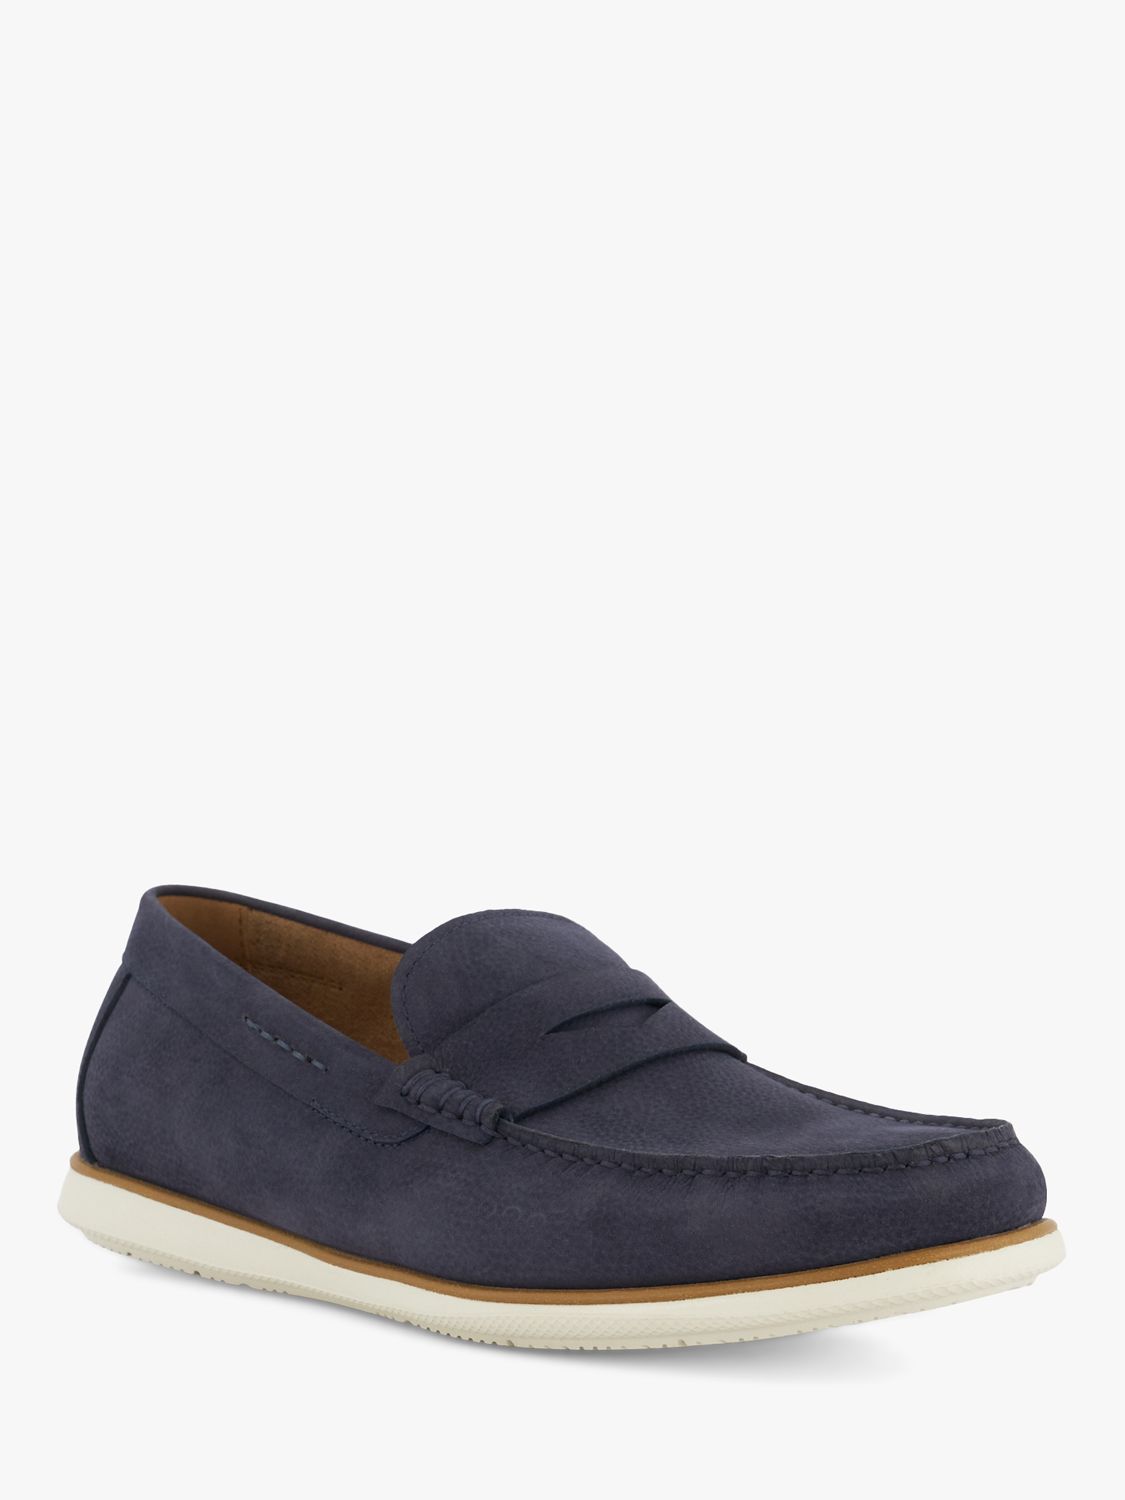 Dune Wide Fit Berkly Nubuck White Sole Loafers, Navy, 11